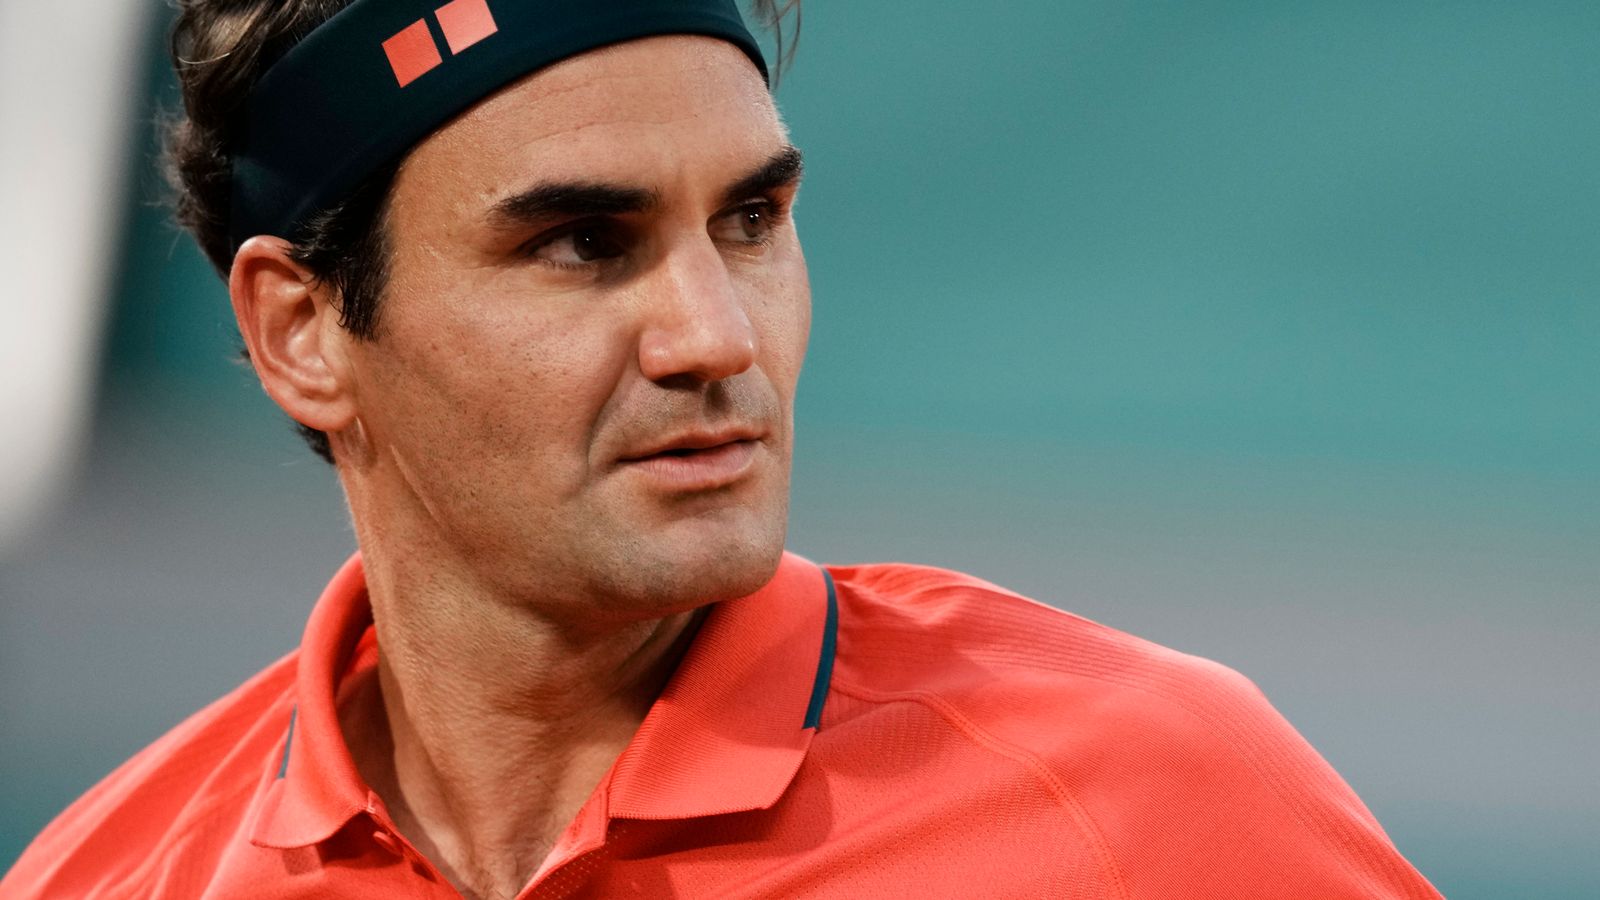 Roger Federer hopes to keep improving with his grass-court season